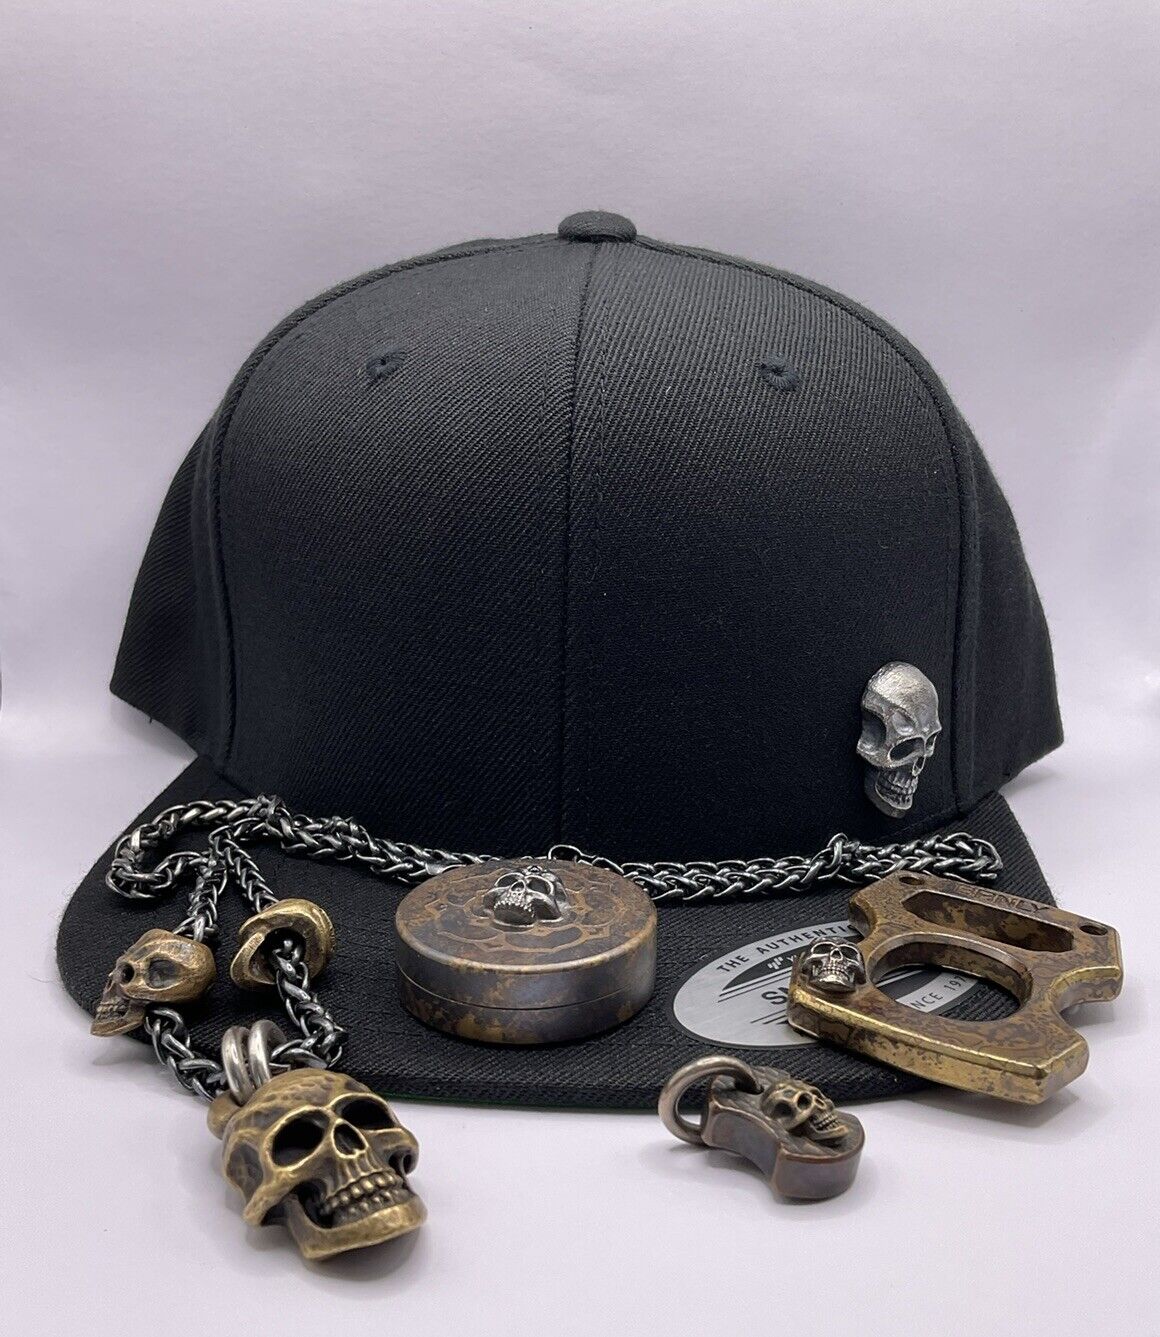 Steel Flame Silver Darkness Yupoong SnapBack EDC Adjustable Hat